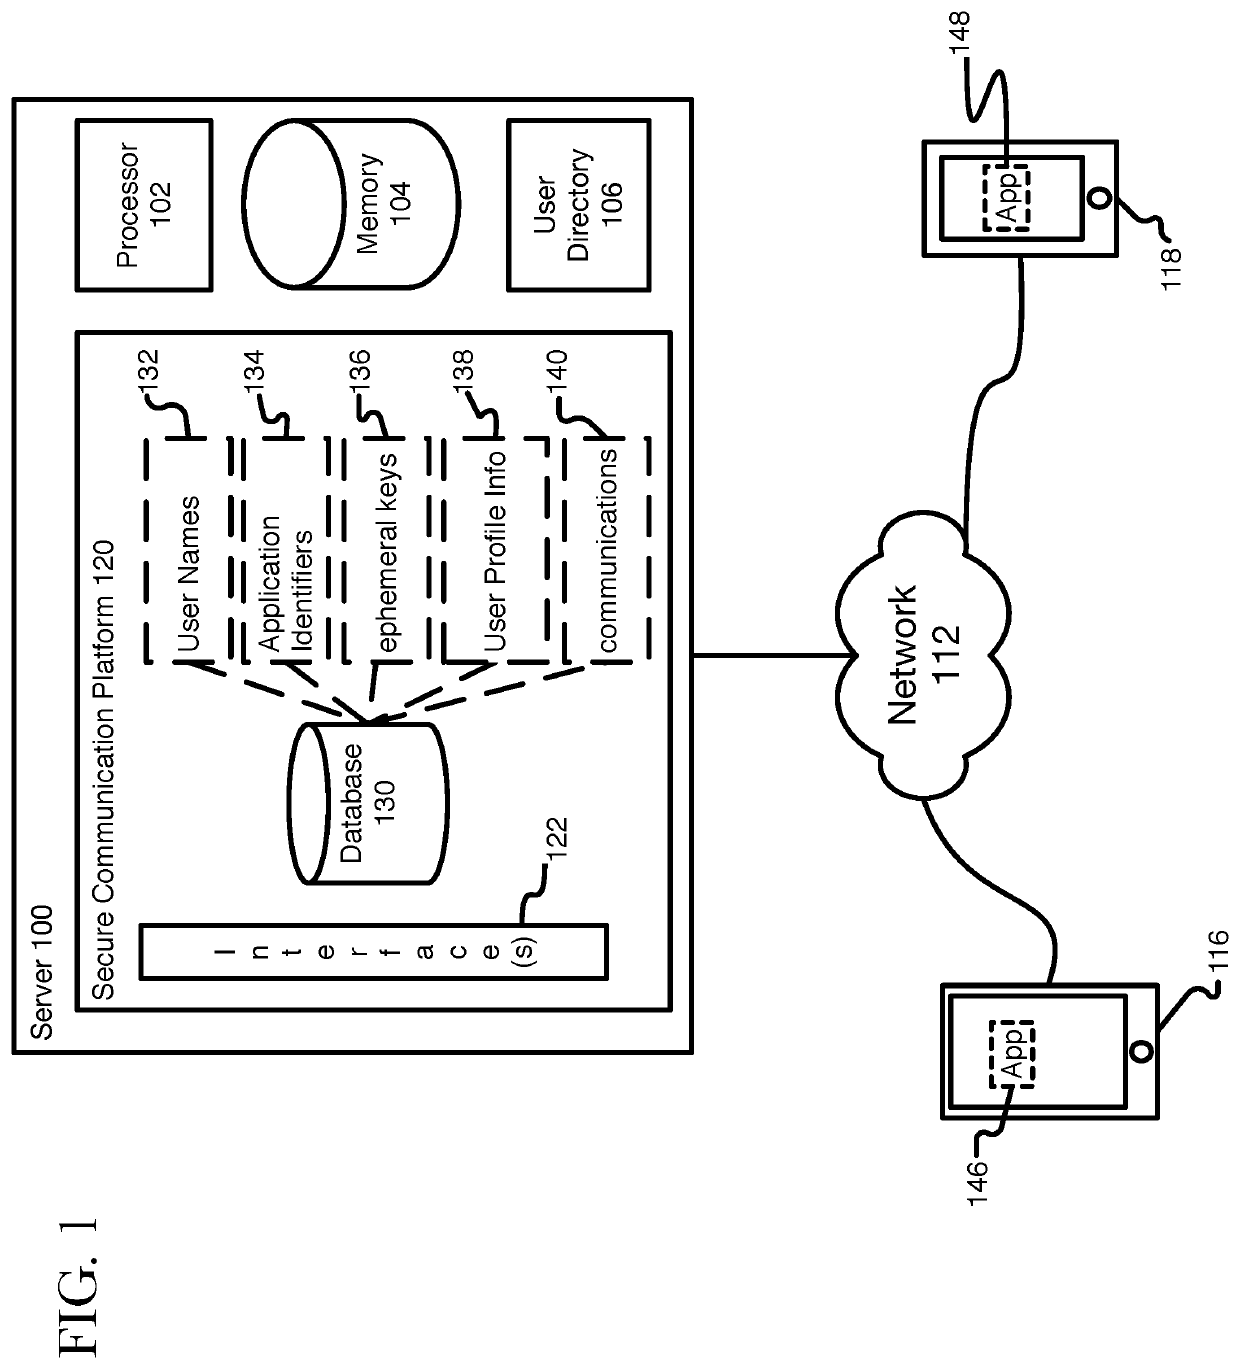 Generating ephemeral key pools for sending and receiving secure communications